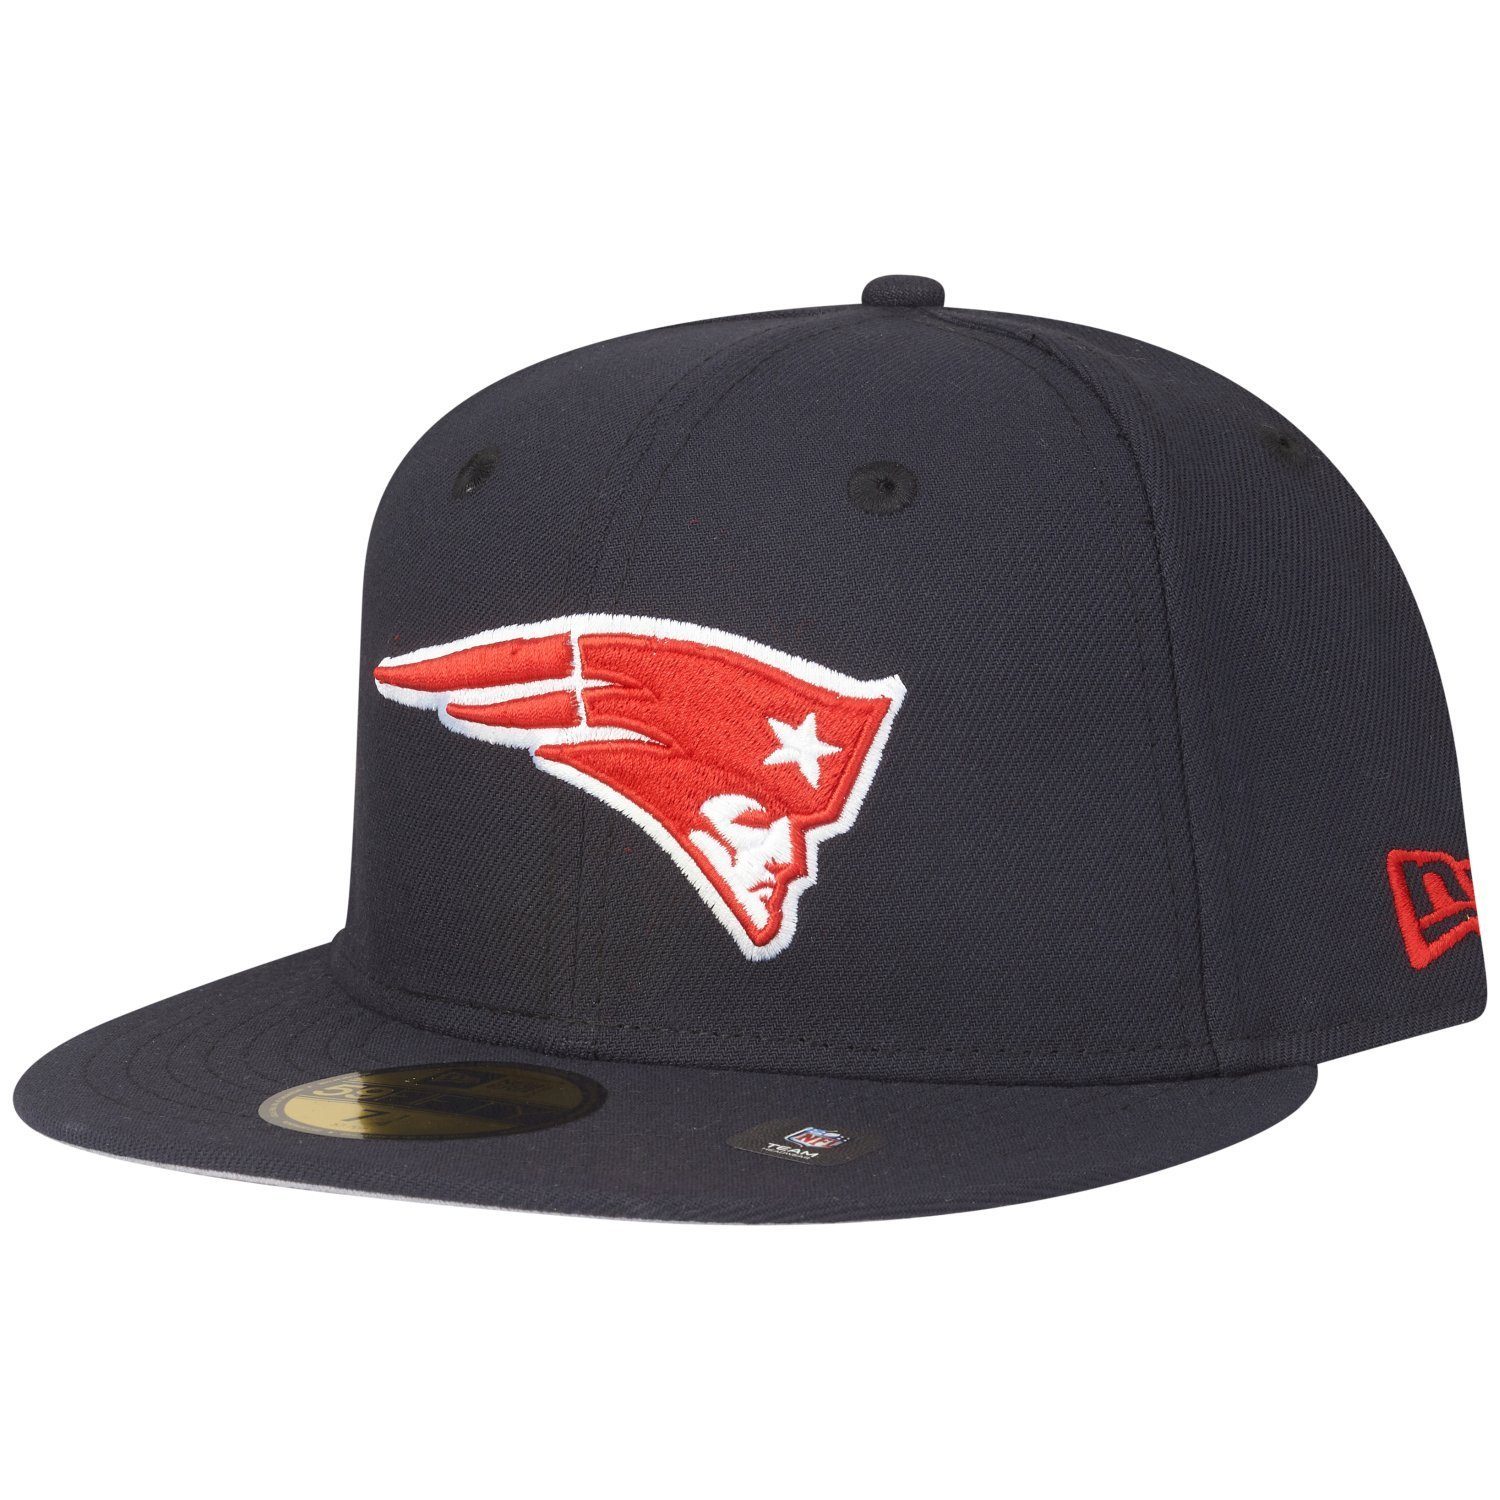 New Era Fitted Cap 59Fifty NFL TEAMS red New England Patriots